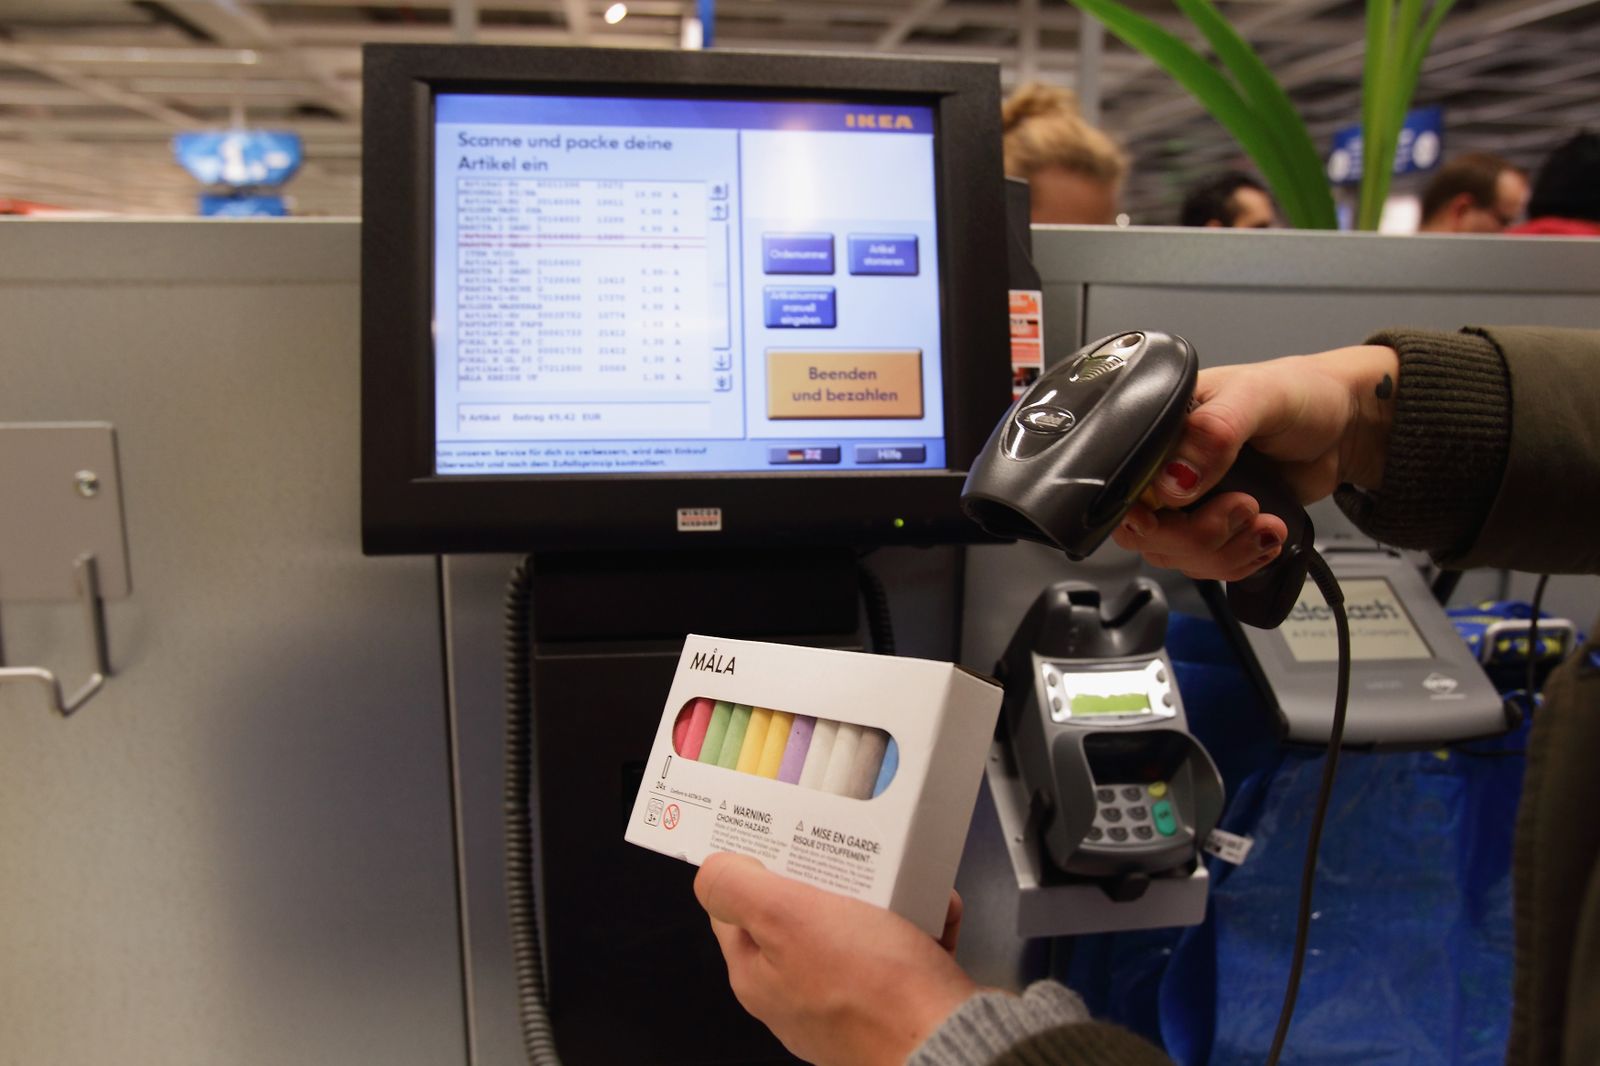 A photo of a person using a self checkout machine in a store.